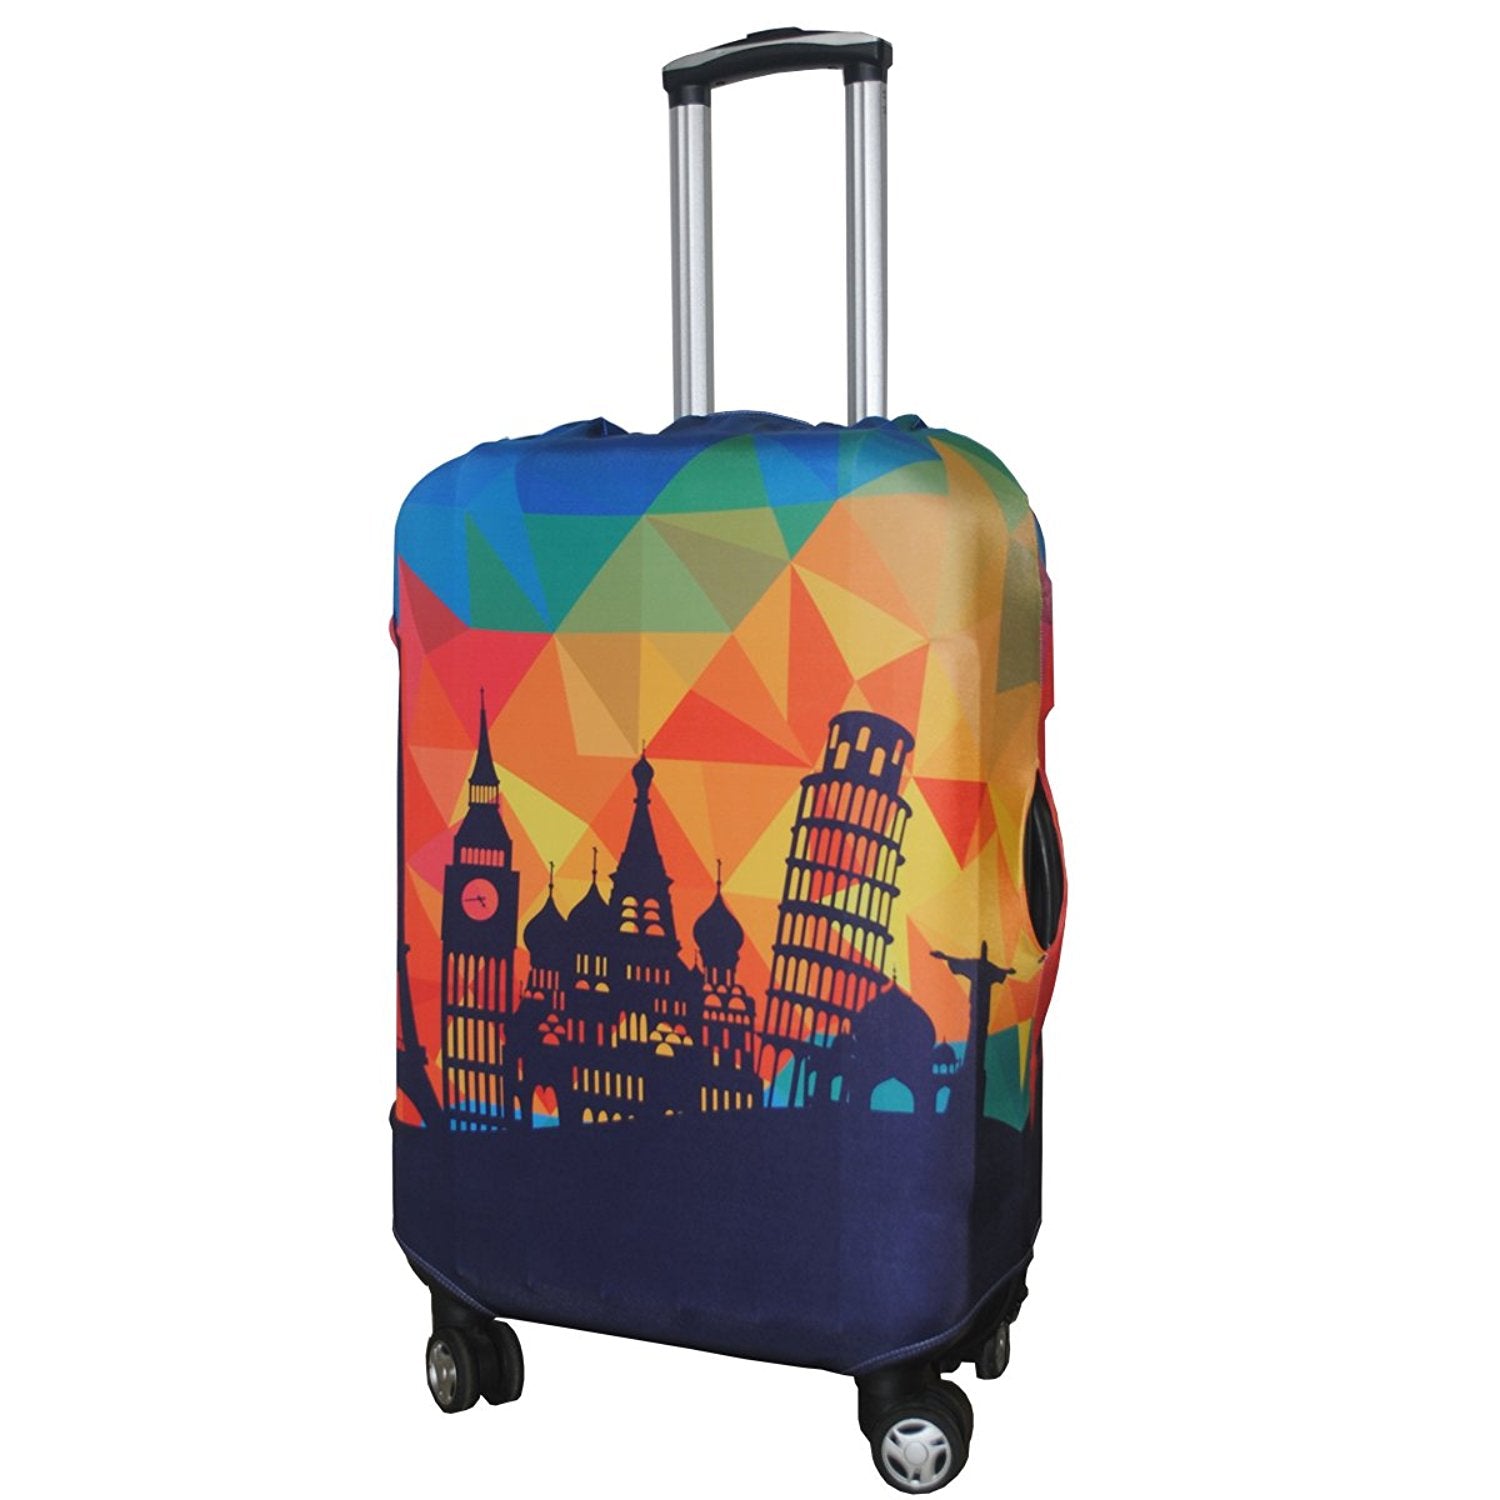 Luggage Cover Travel Case Cover for 29 to 32 inch Luggage